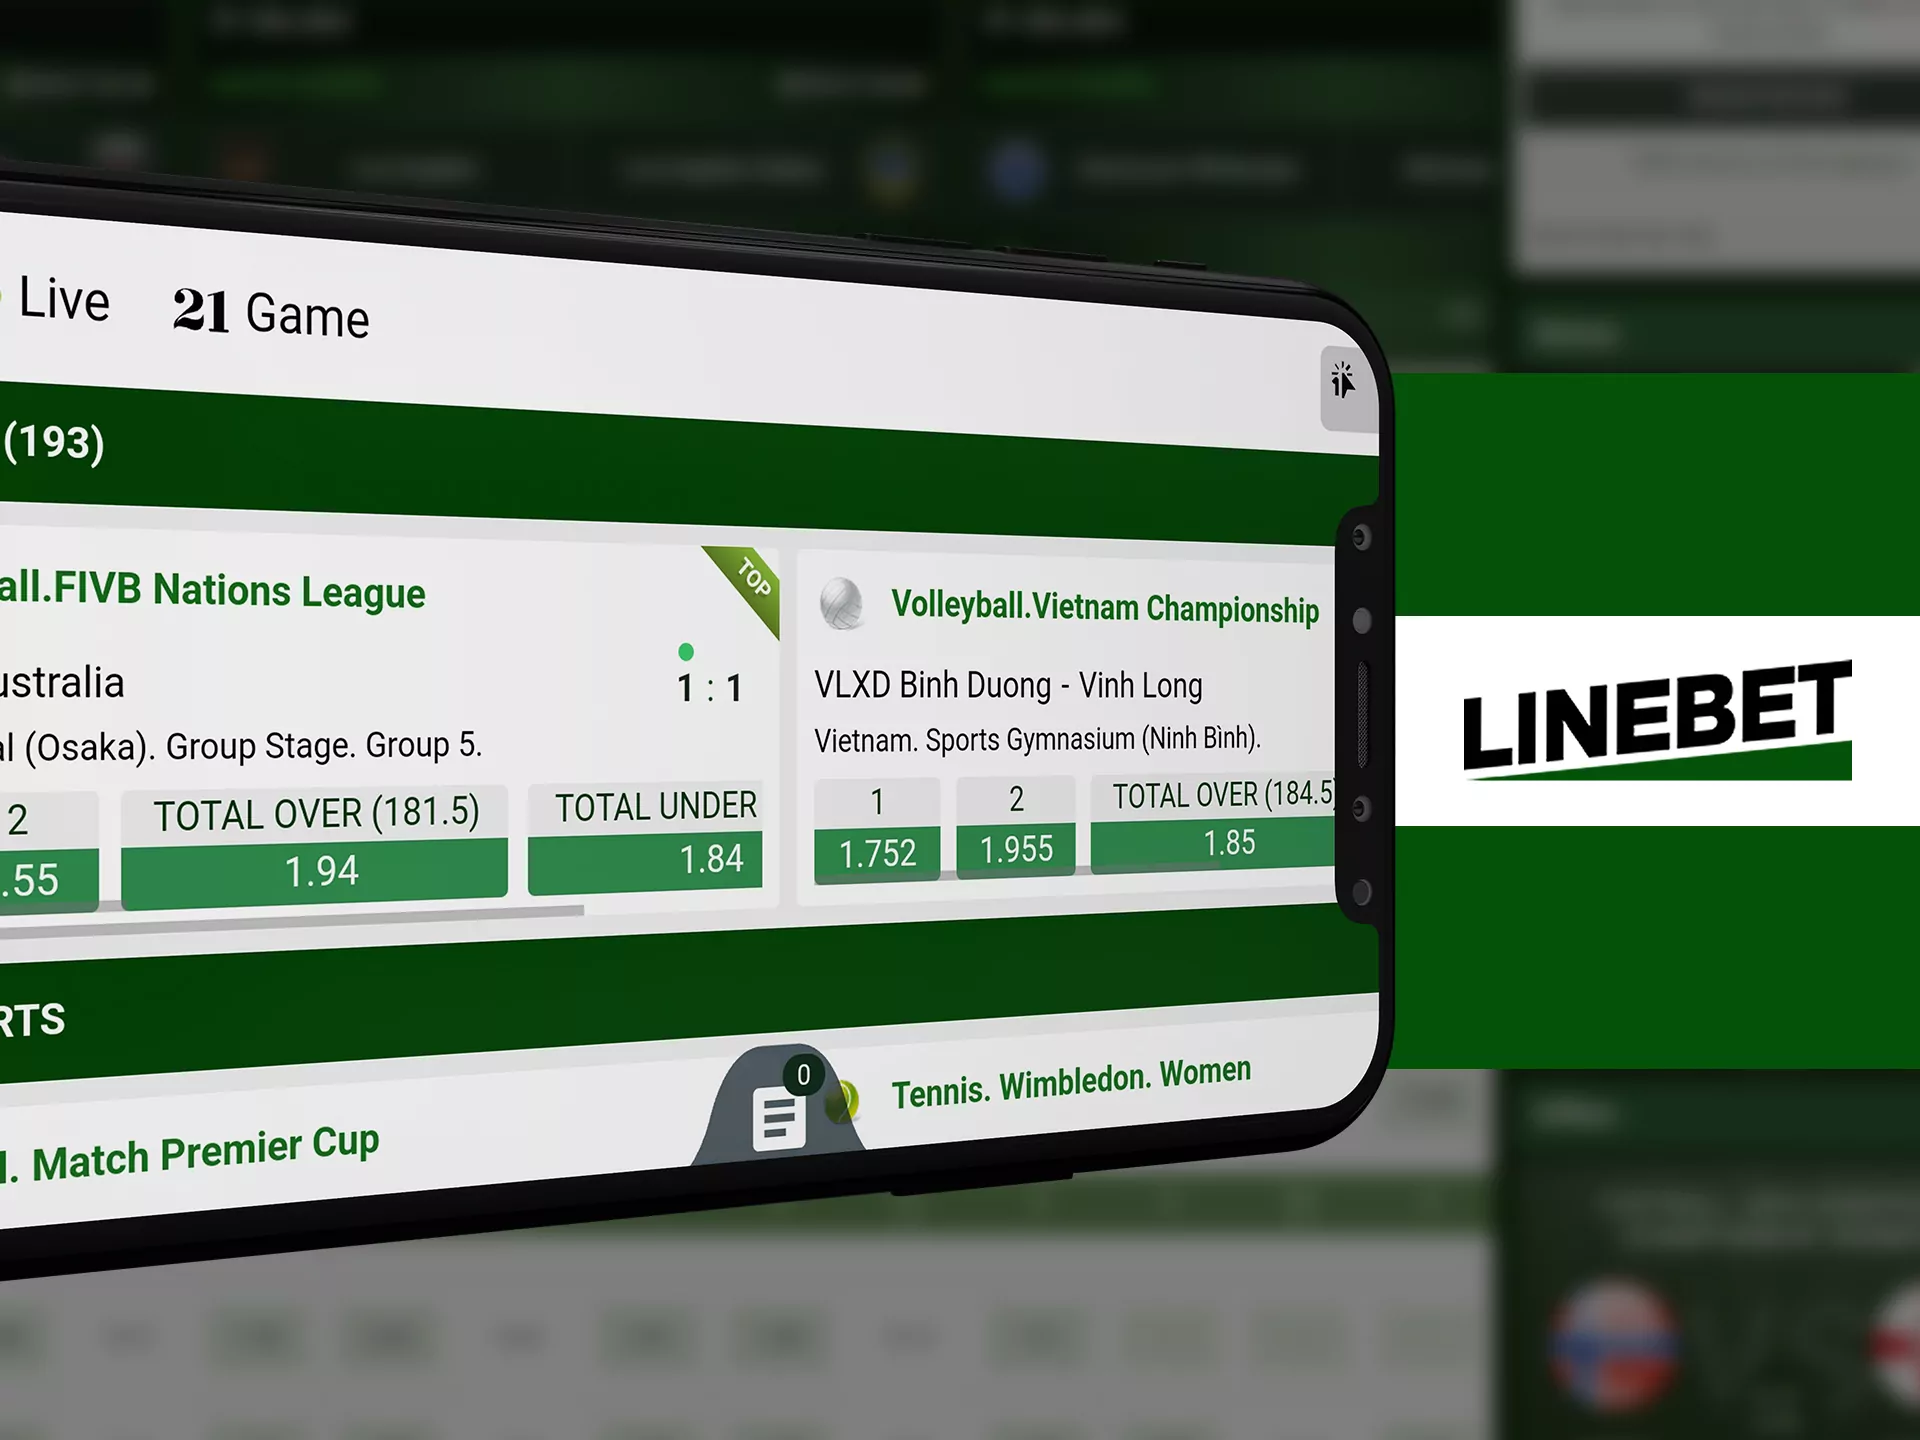 You can use Linebet app in any position.